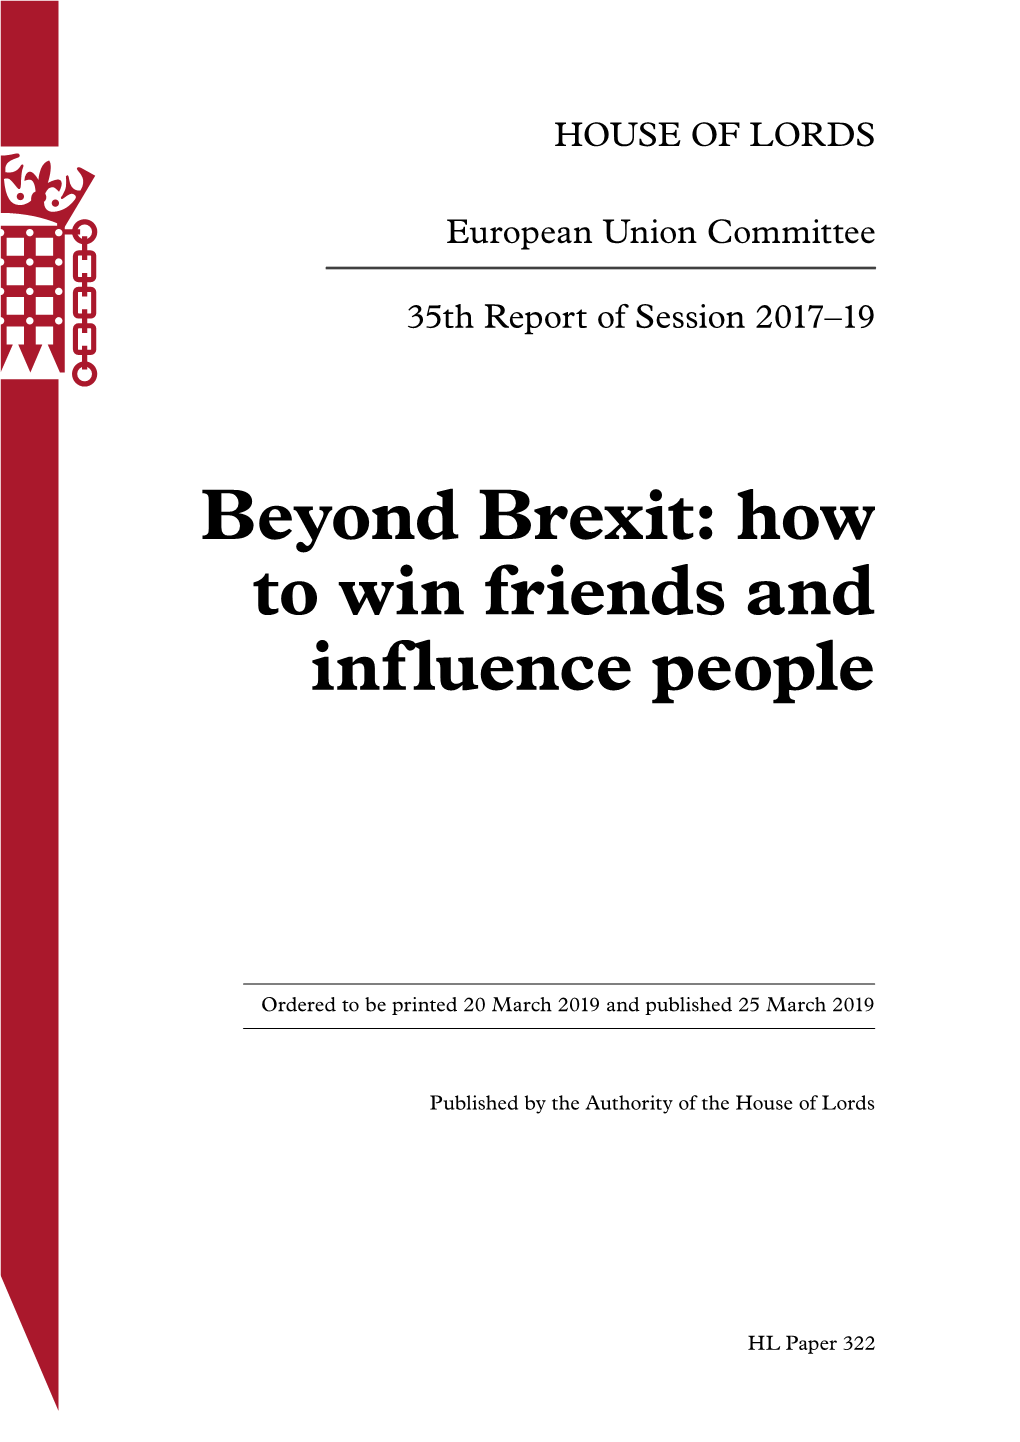 Beyond Brexit: How to Win Friends and Influence People